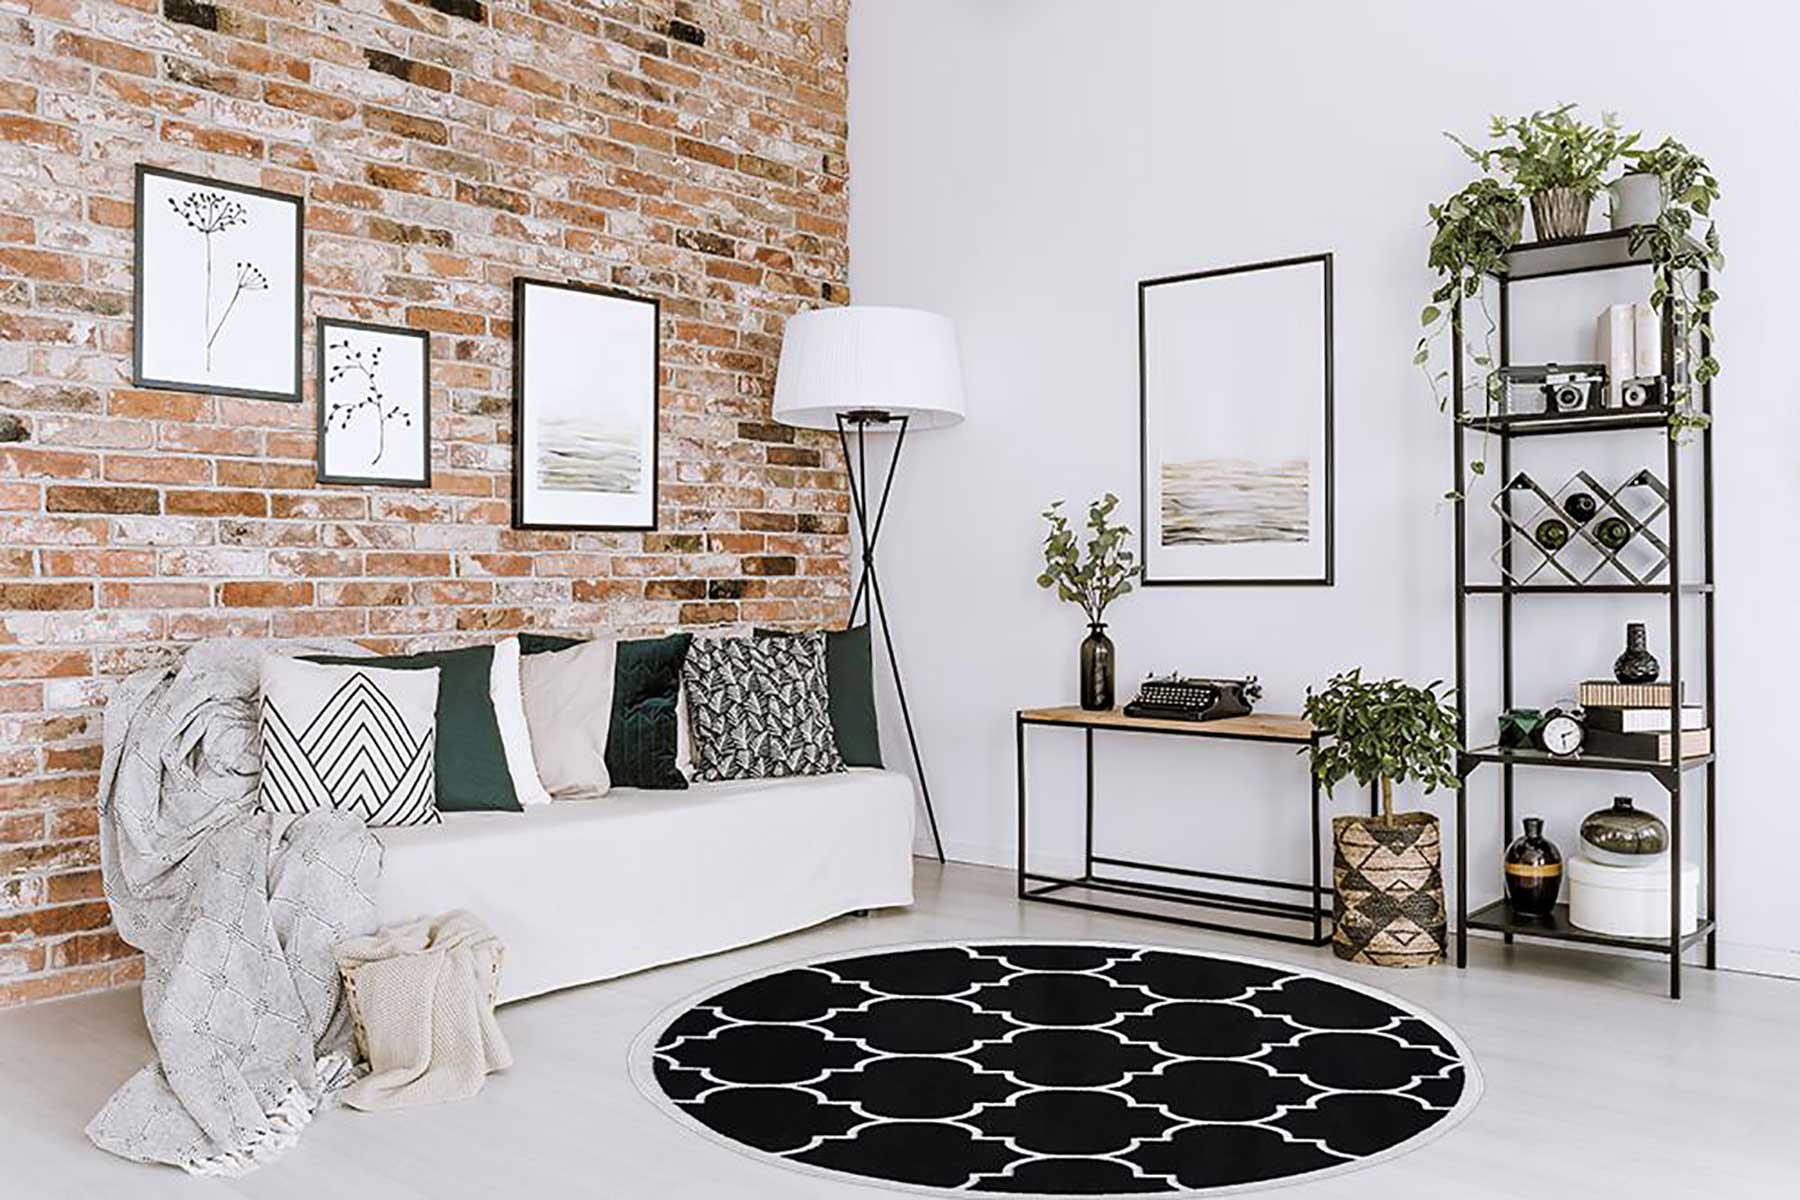 Aesthetic Appeal of Round Rugs